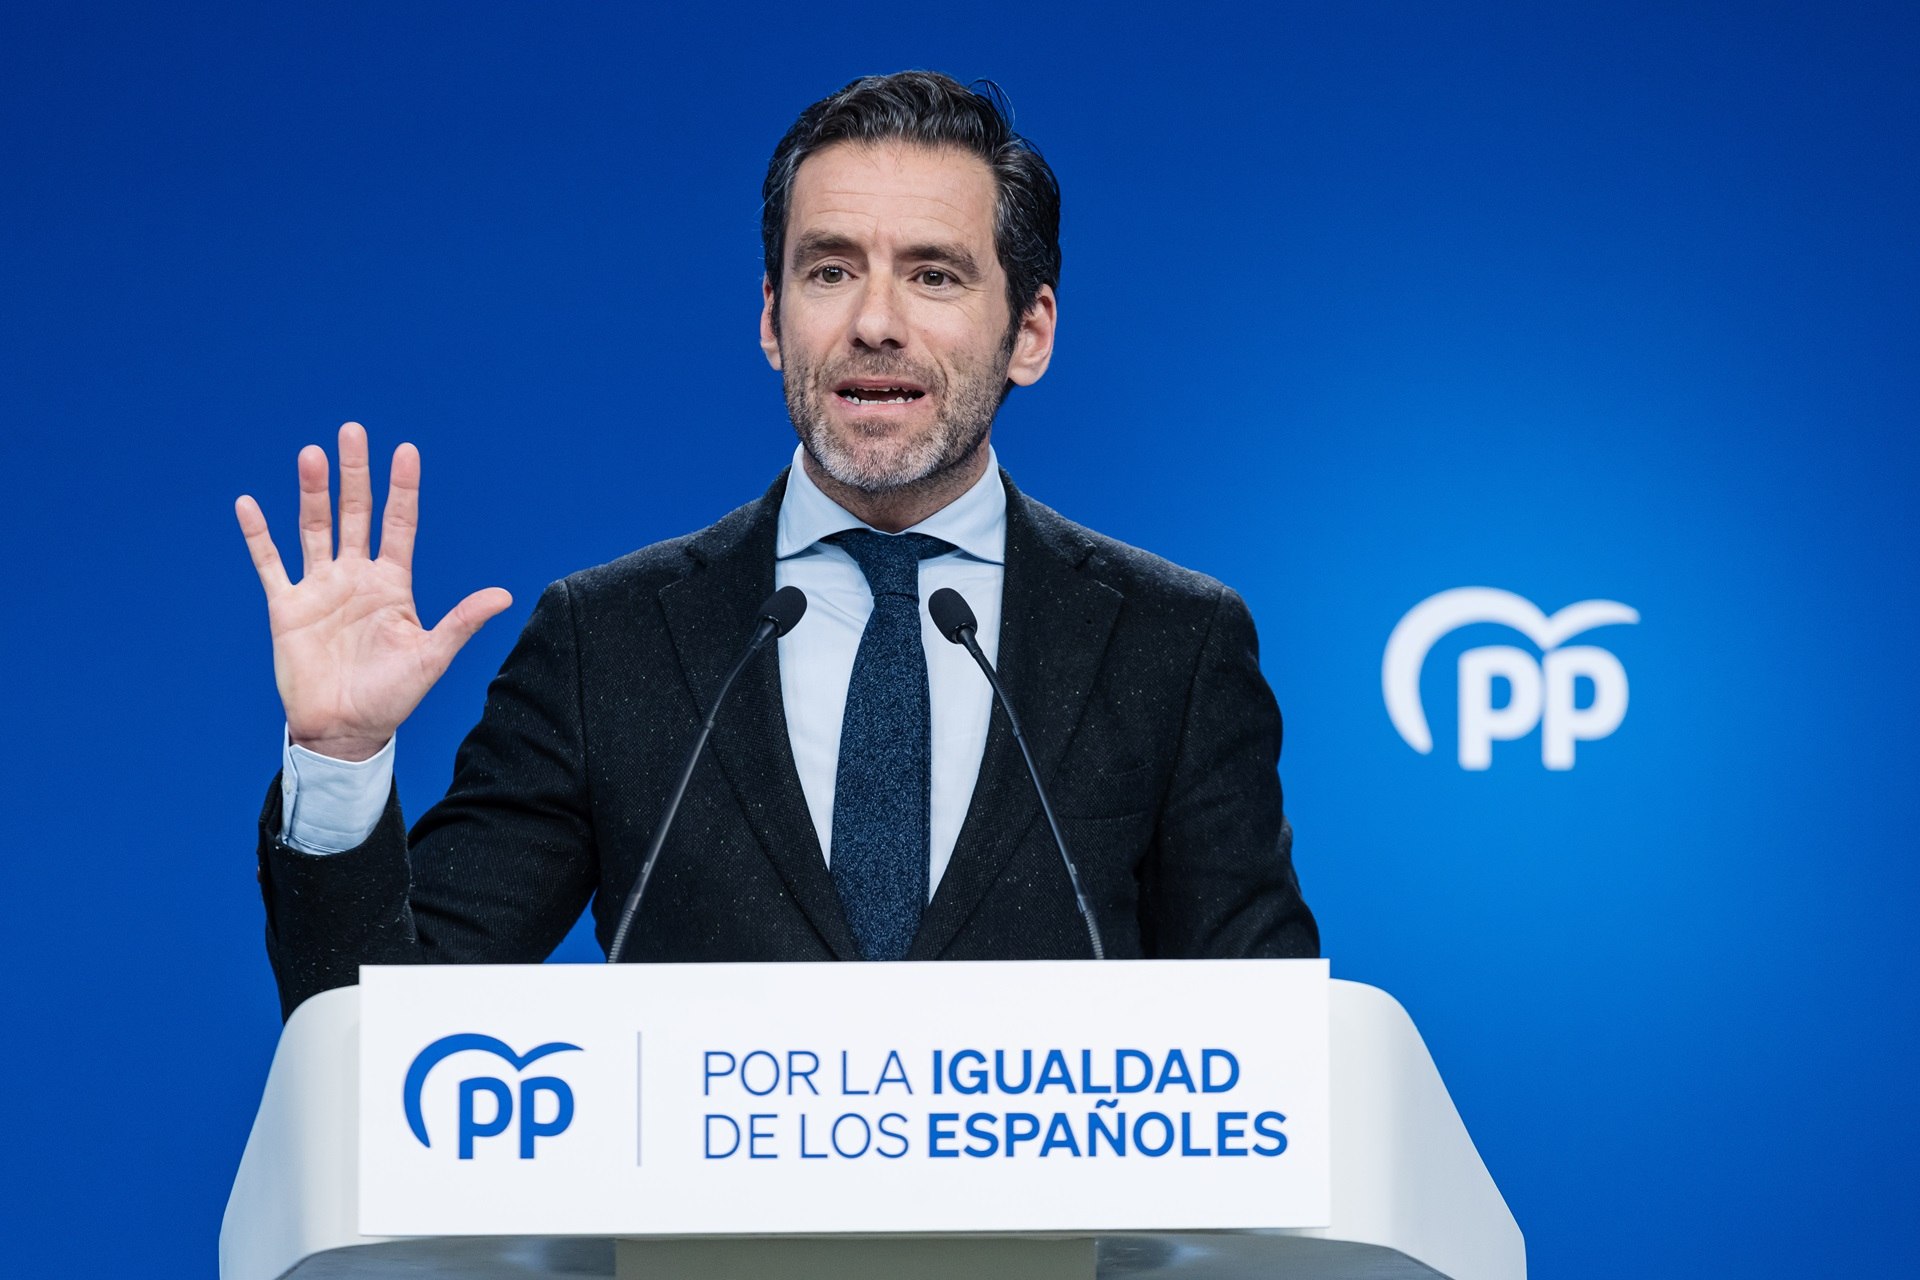 PP will only allow renovation of Spain's blocked judiciary if its nomination system is accepted